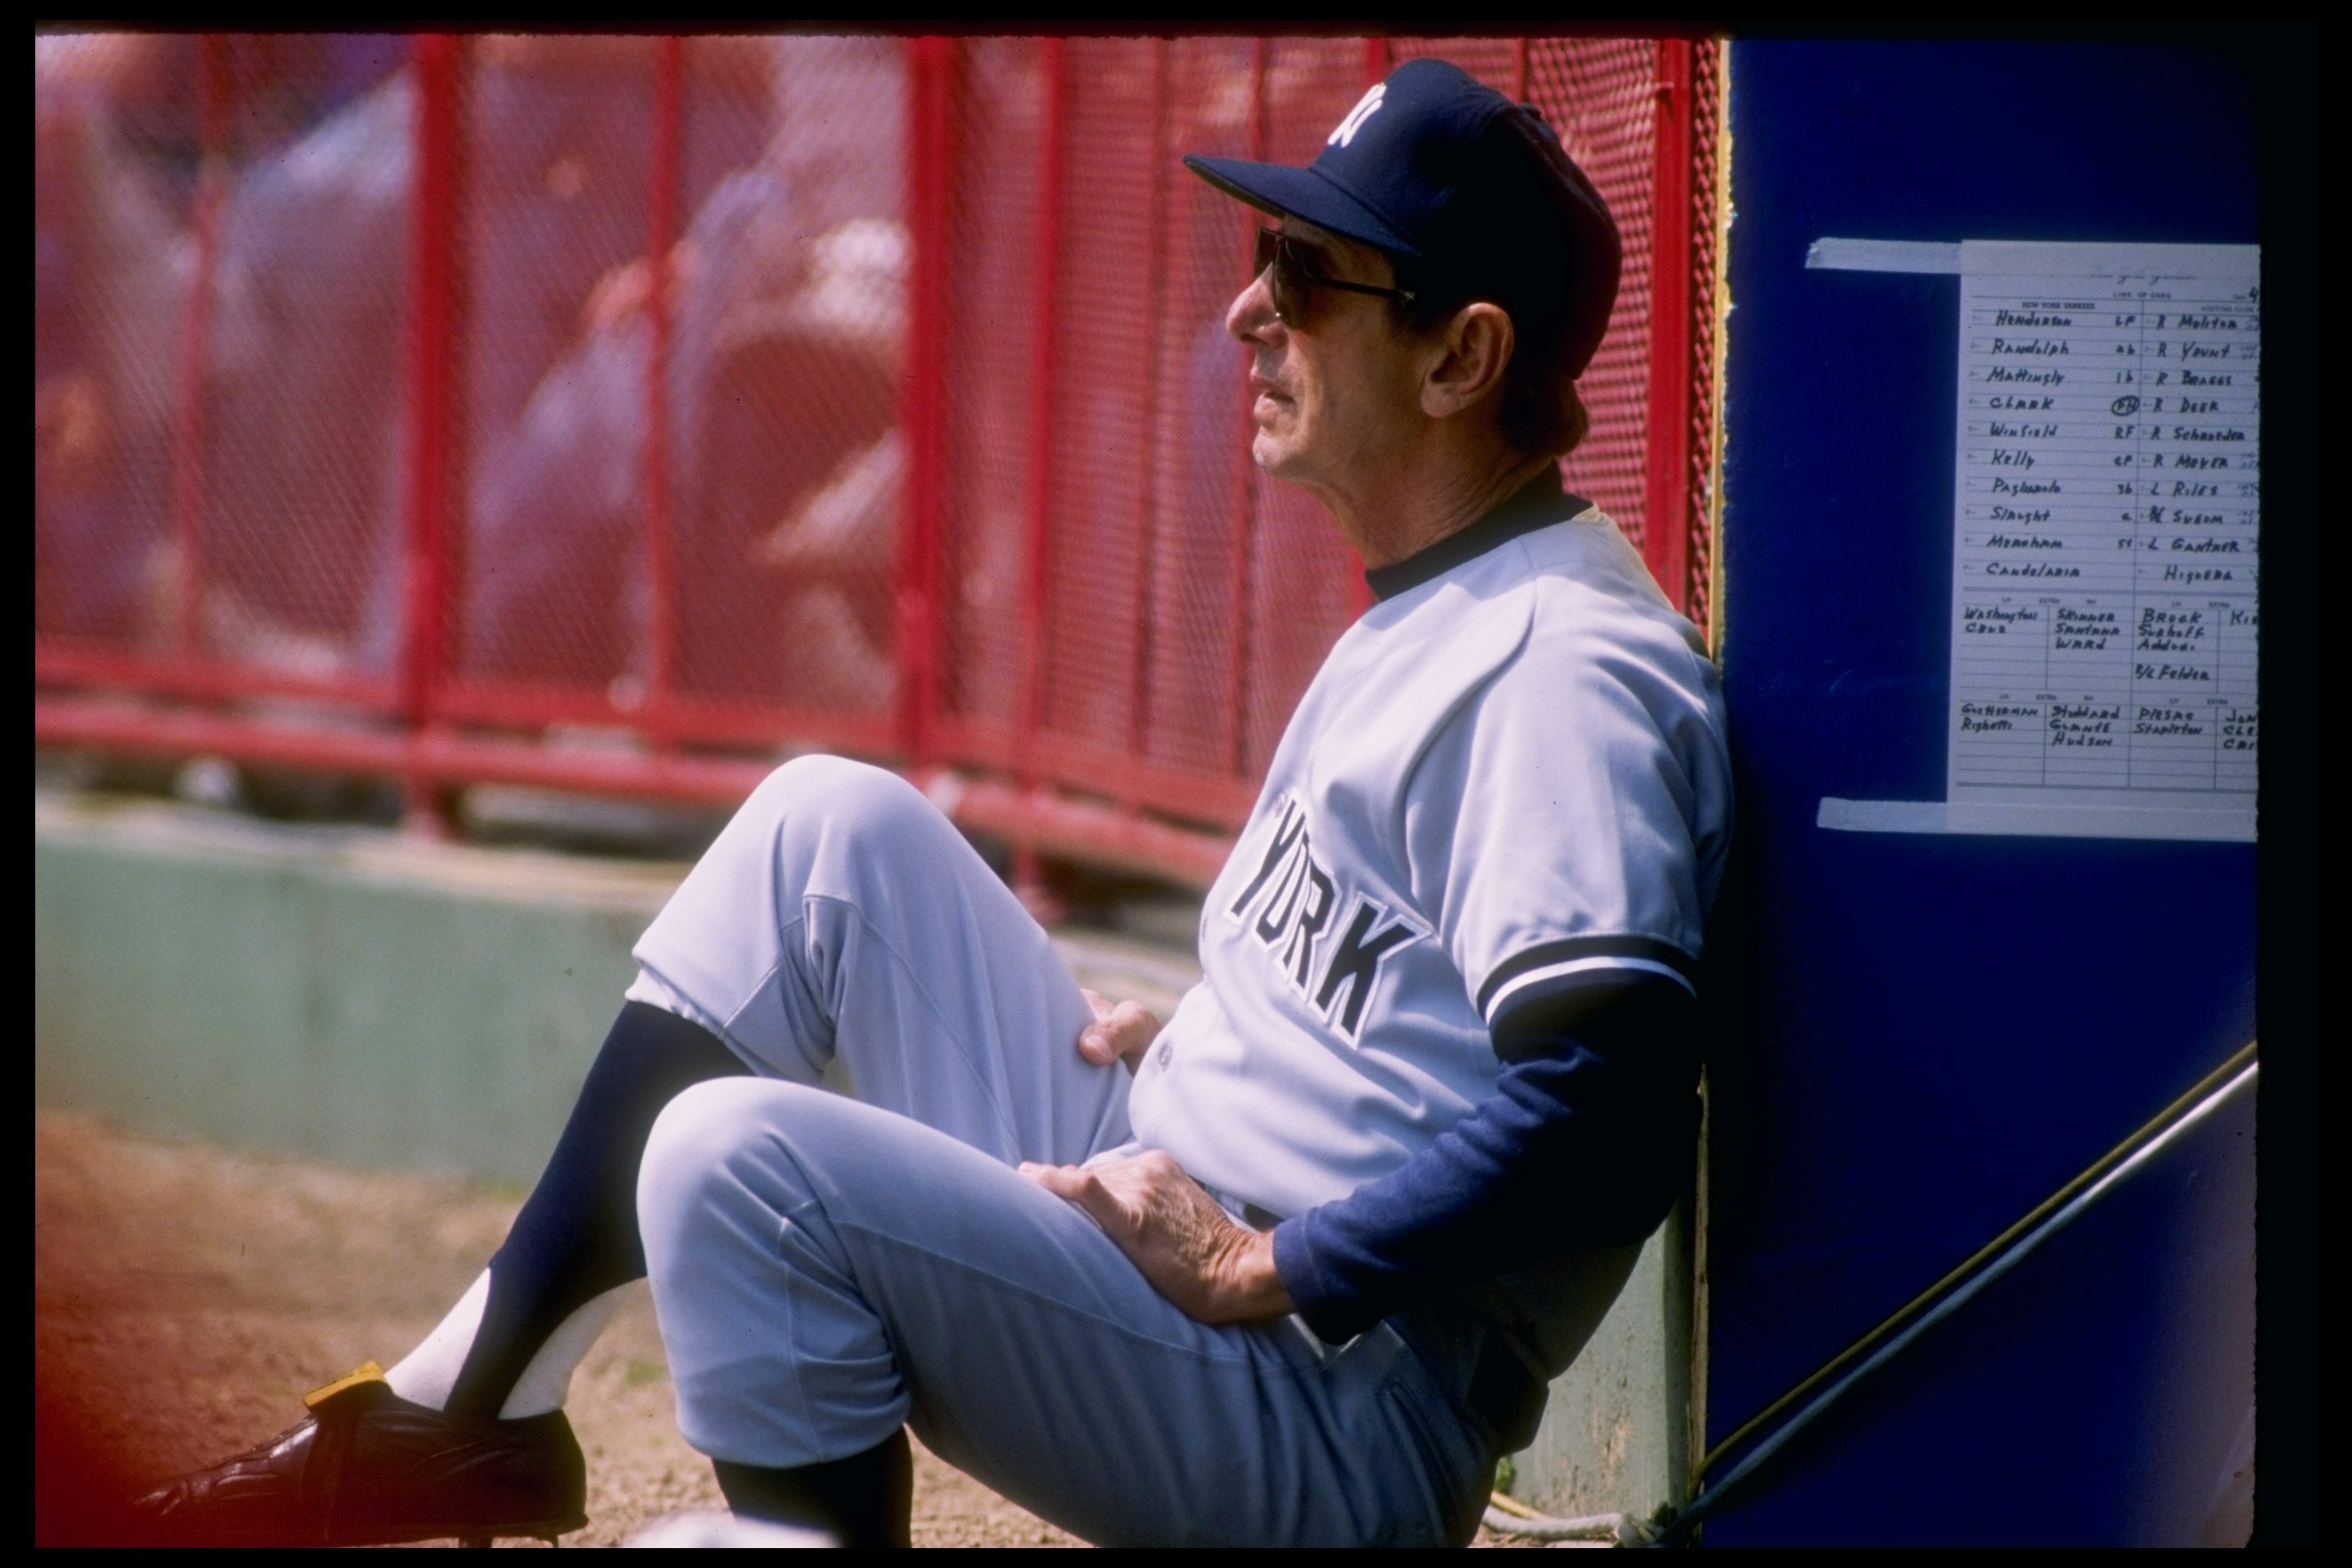 Billy Martin of the New York Yankees looks on during a game.